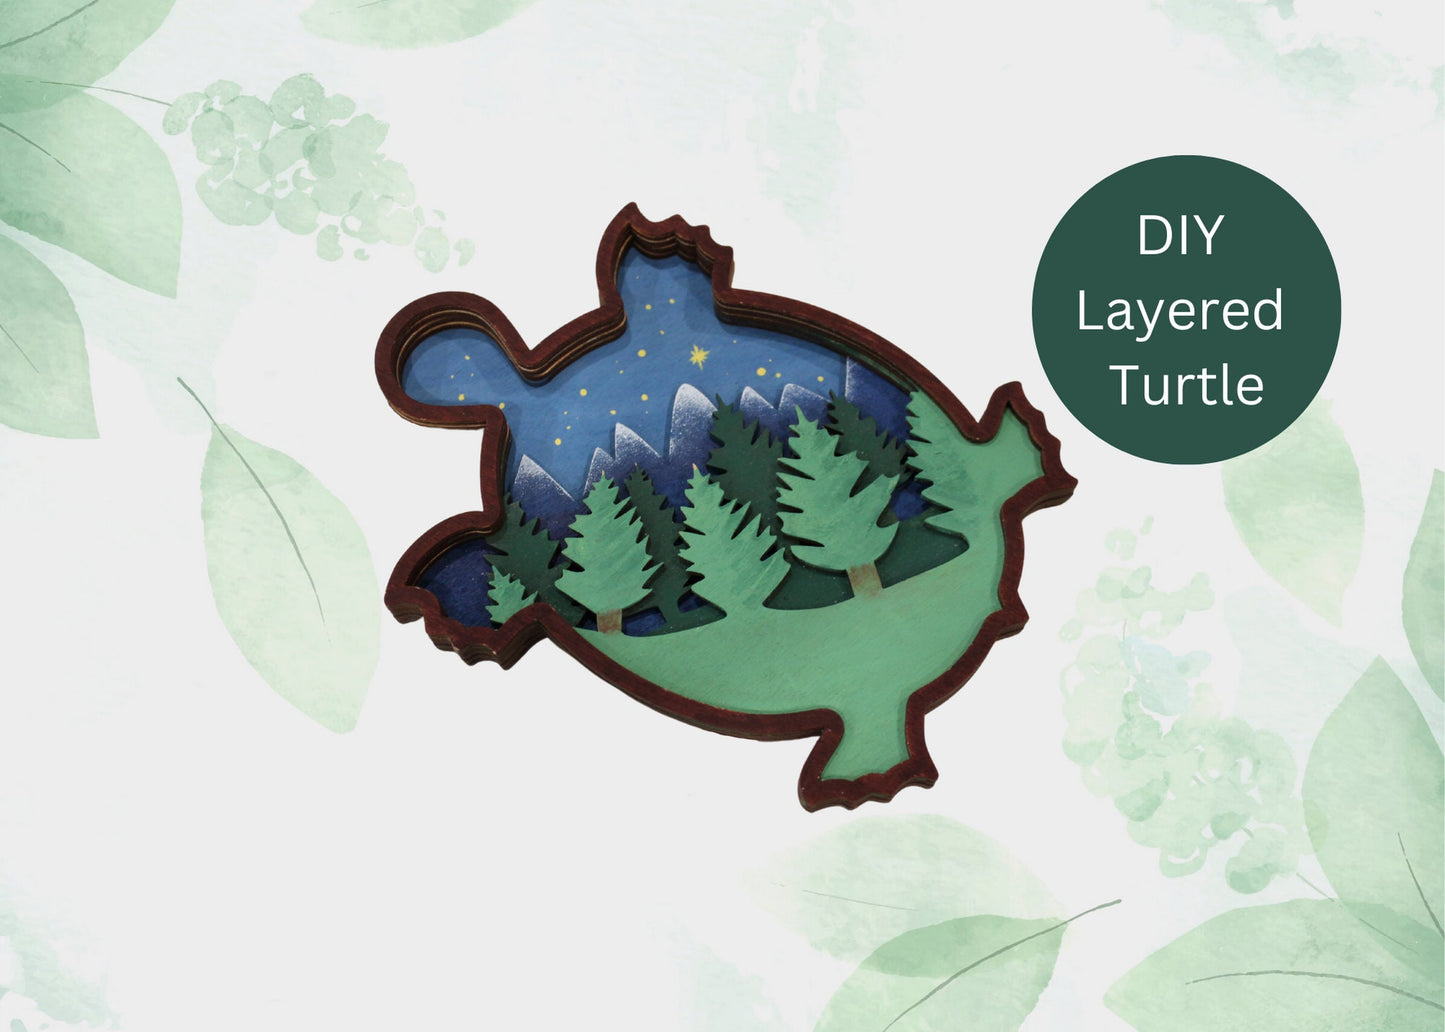 DIY Turtle Paint Kit, Wood, Ready to Paint, Make Your Own Activity, Nature Craft, Paint Party Set, Layered Wood Art, Woodland Tortoise